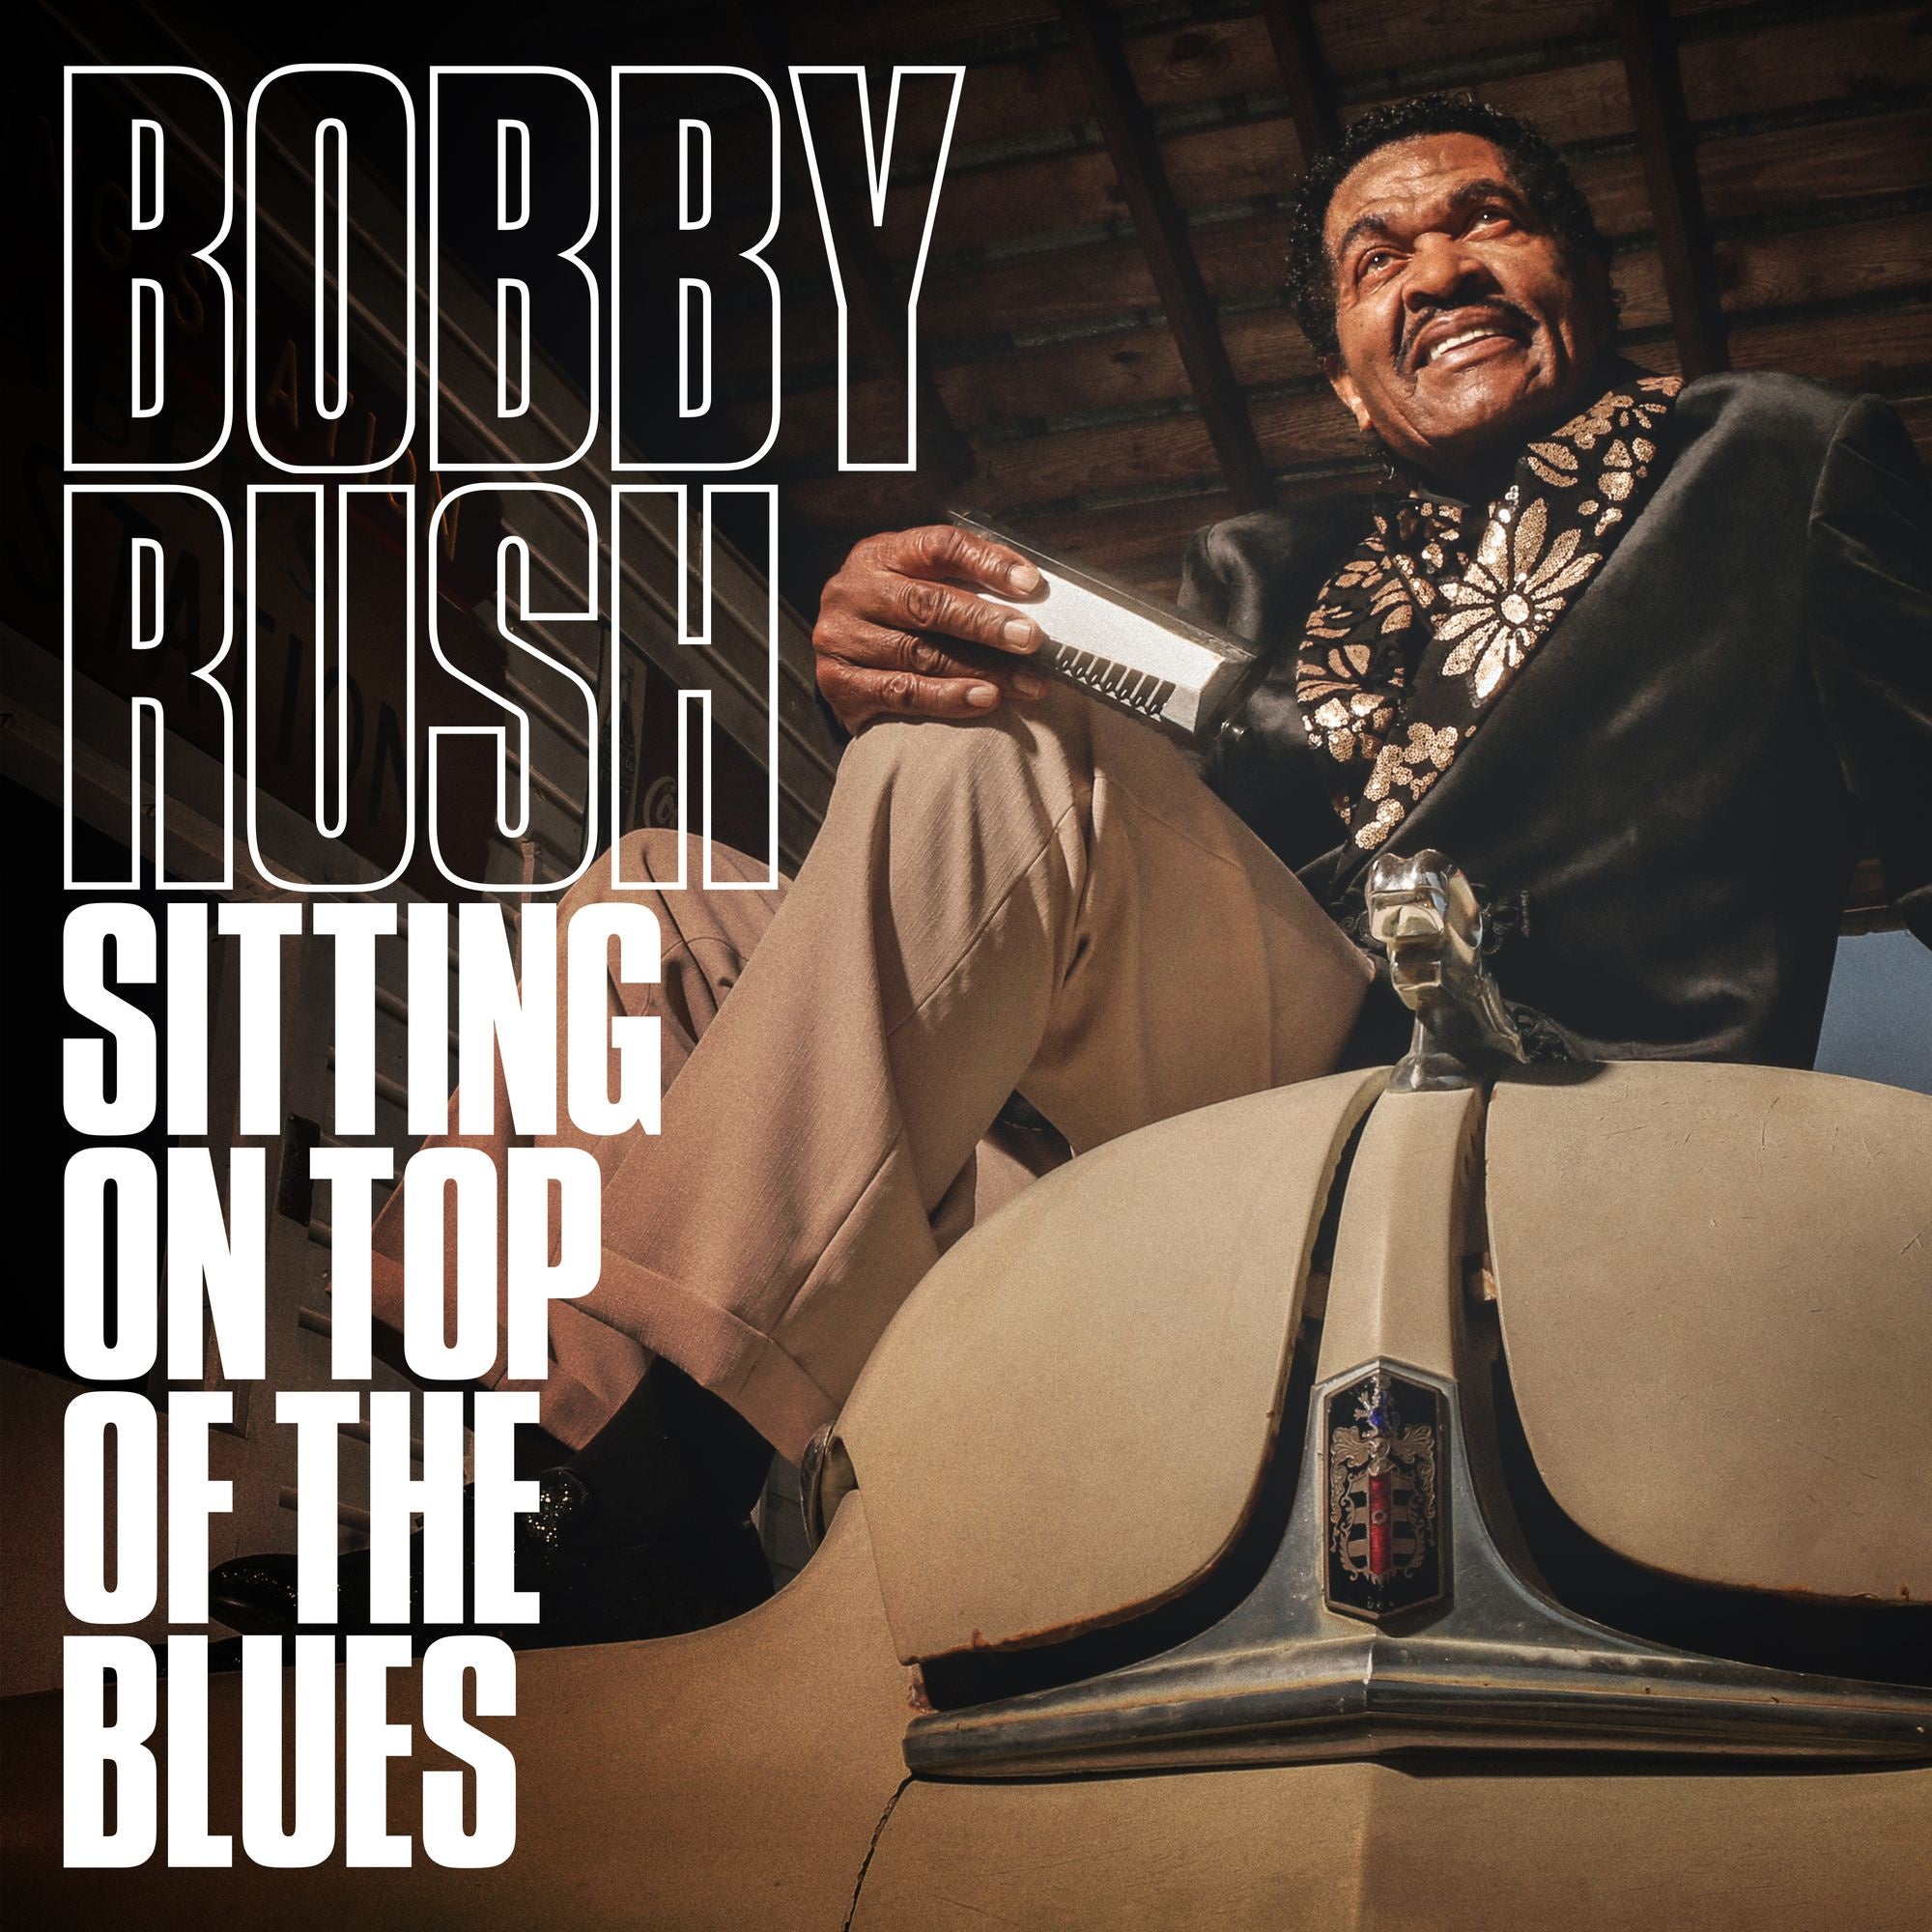 Bobby Rush - Sitting on Top of the Blues - New Vinyl LP Record 2019 - Blues